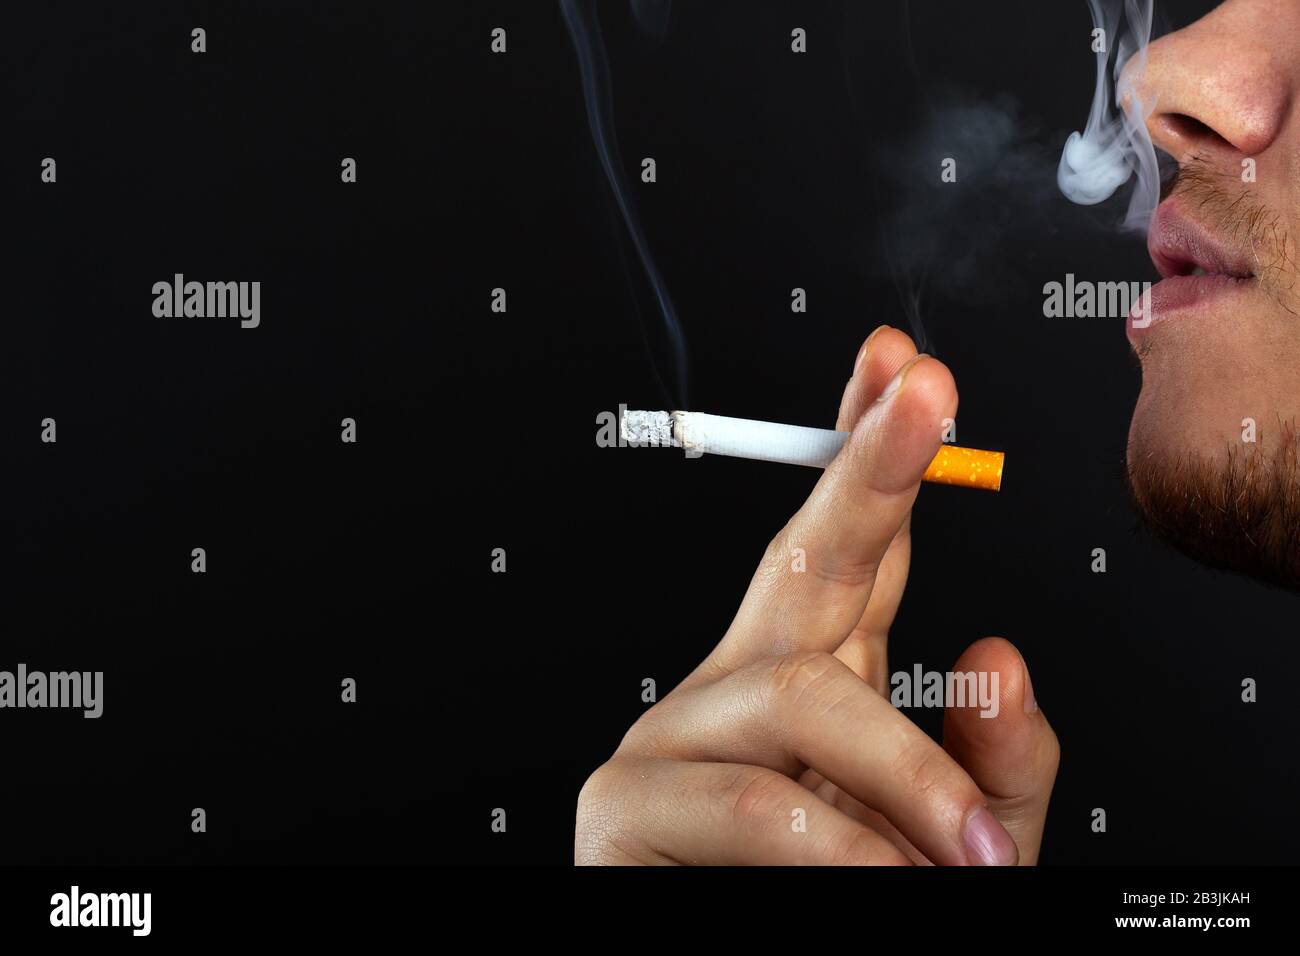 A young man holds a cigarette in his hands and exhales smoke on a dark background. harm from smoking nicotine and tobacco use close-up. Stock Photo